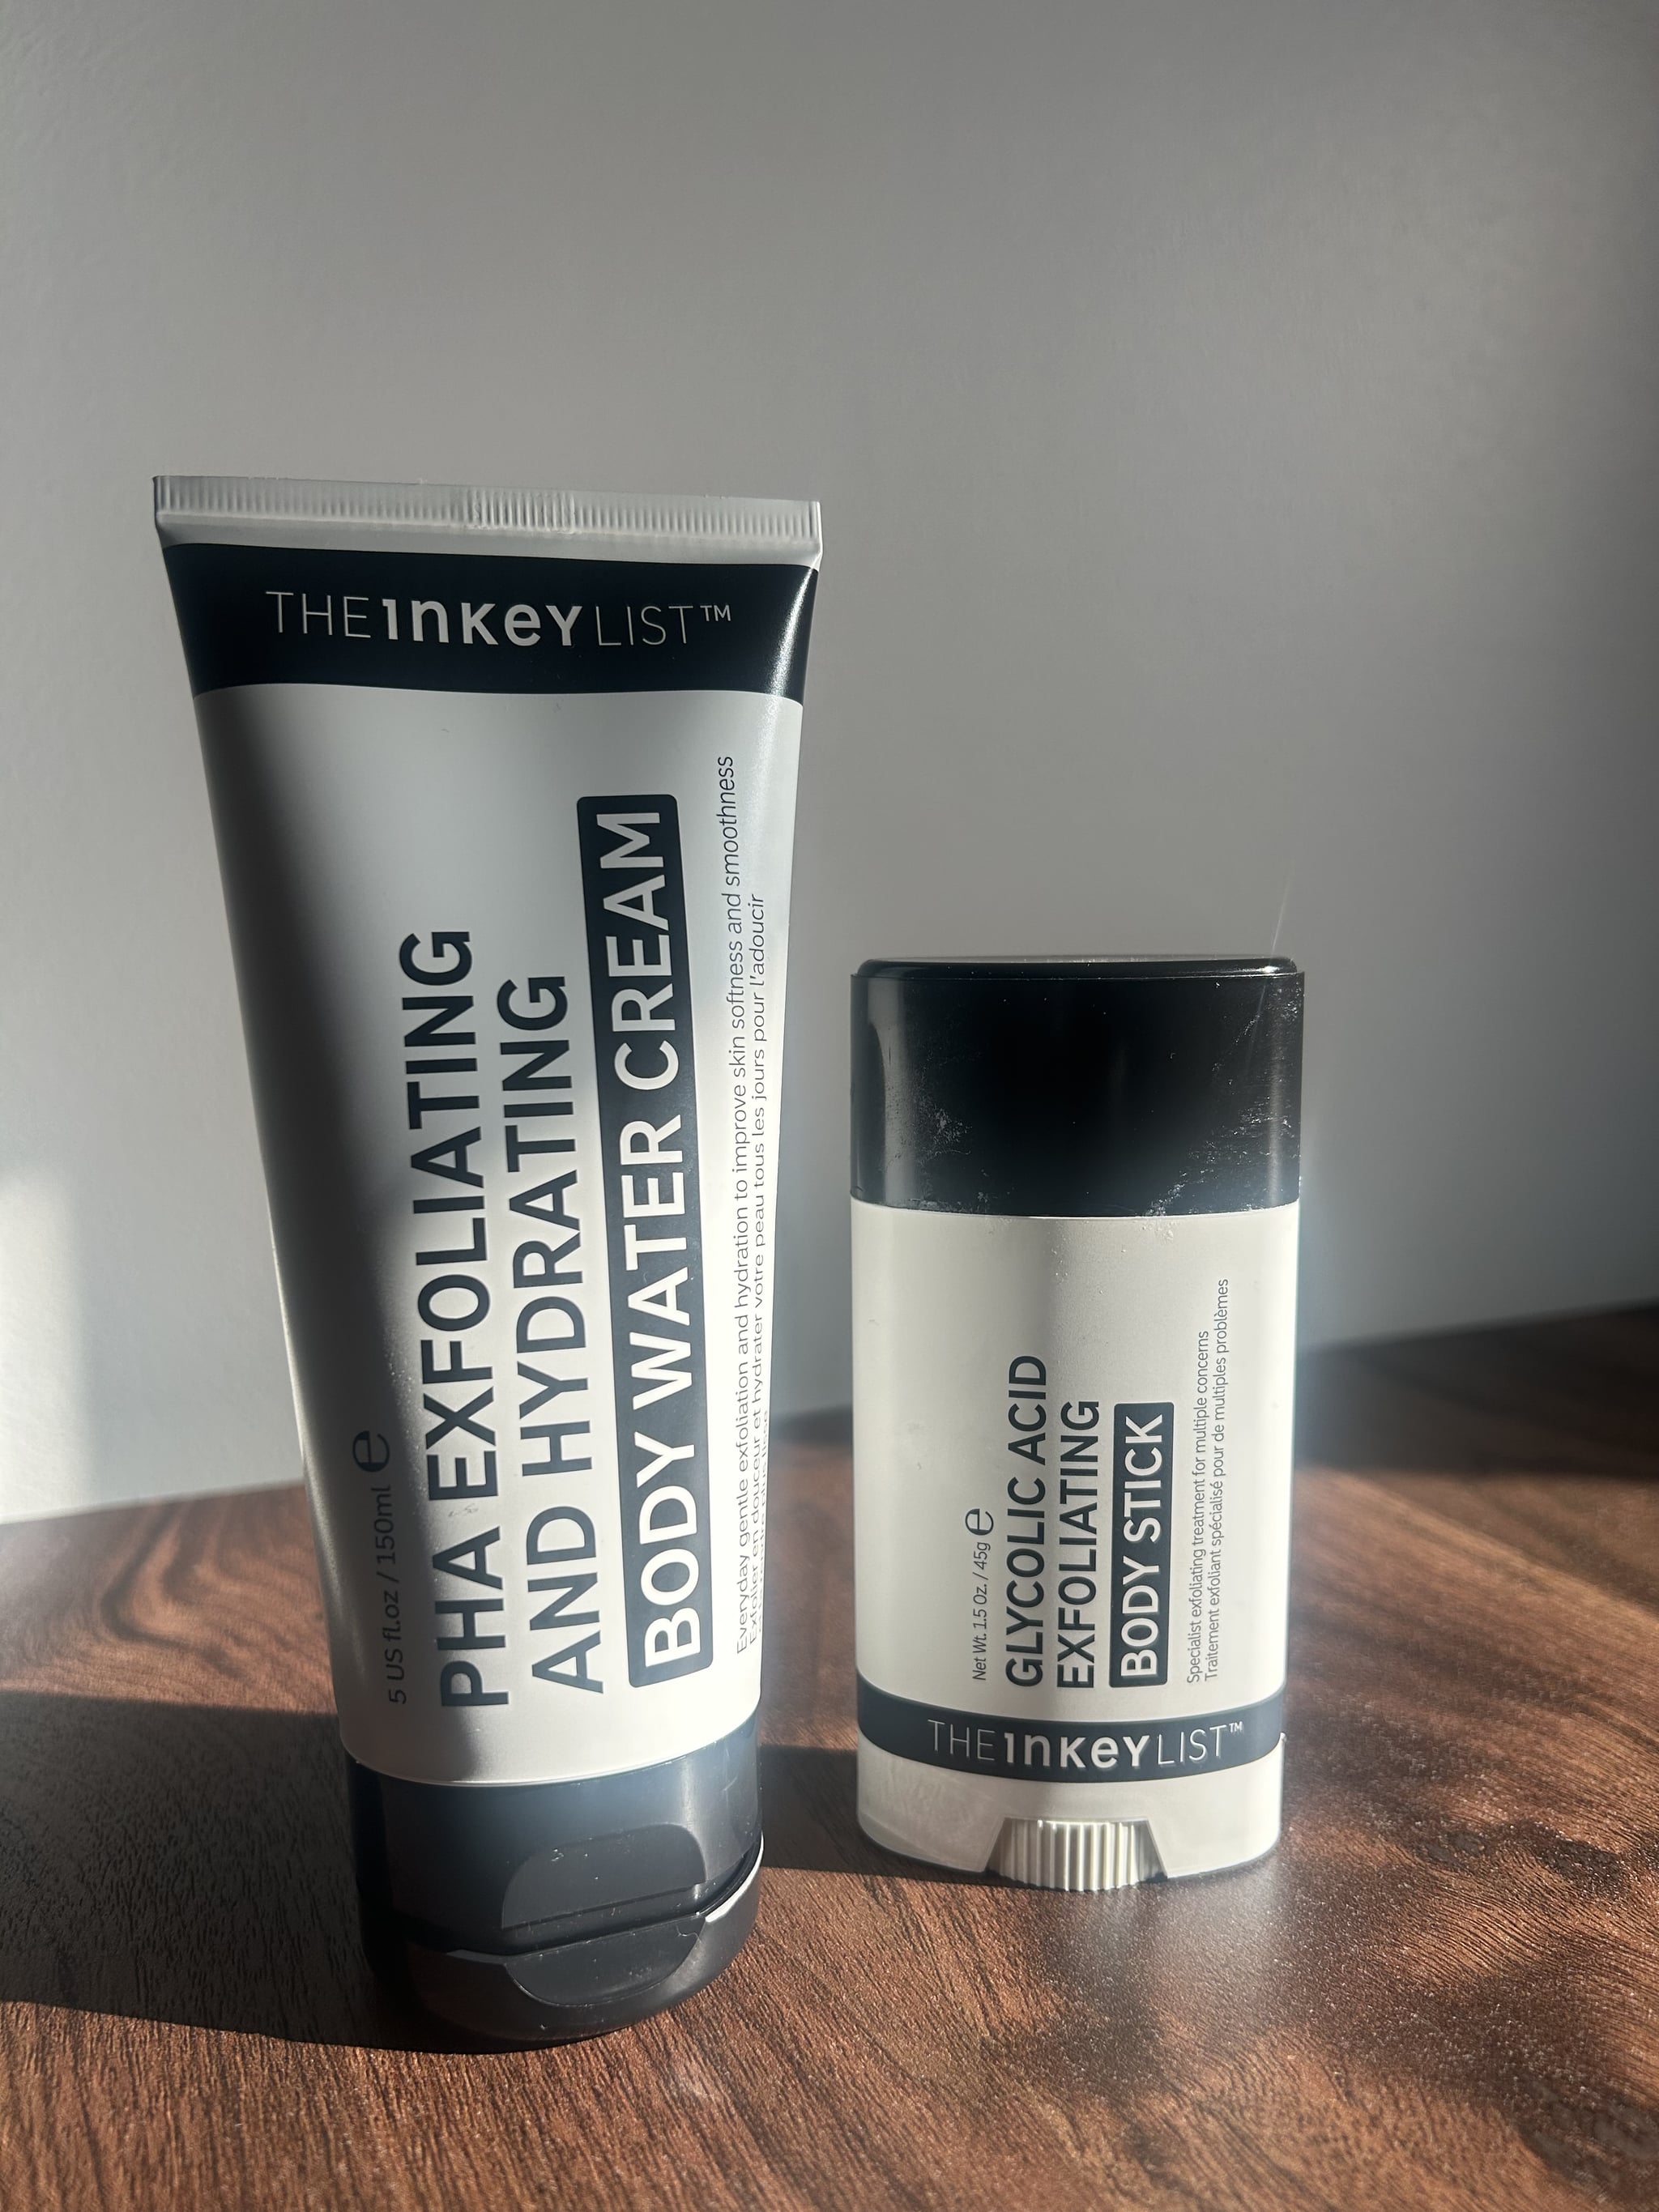 The Inkey List Exfoliating Body Water Cream and Body Stick on a wooden table